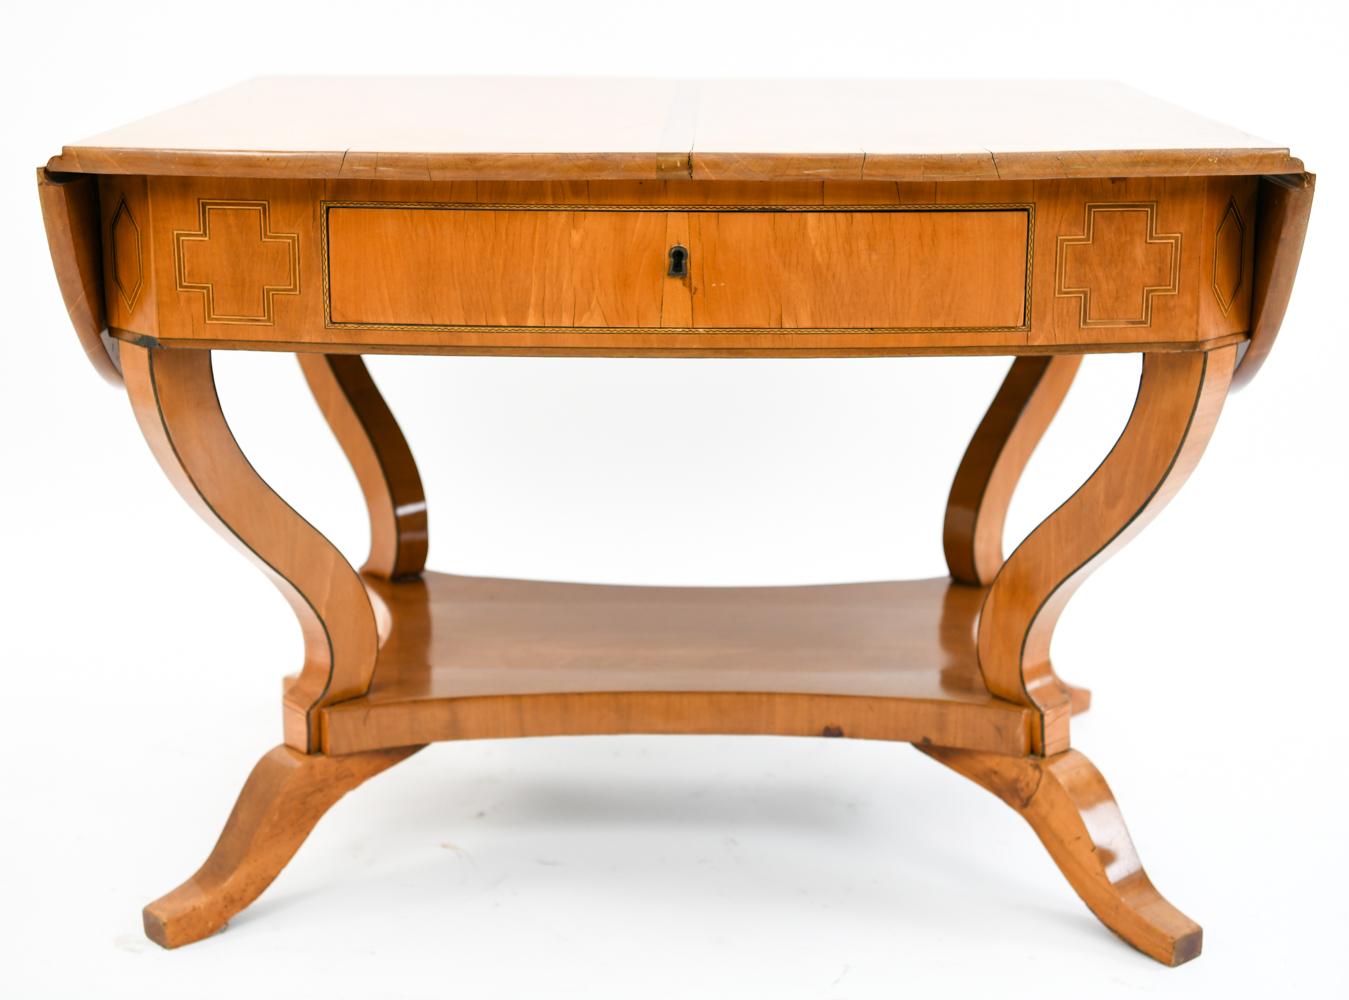 This is a handsome antique Danish Biedermeier birch desk with drop leaves. This desk features a cross motif on either side of the drawer and sits upon gracefully curved legs. This piece is in the style of Karl Johan.